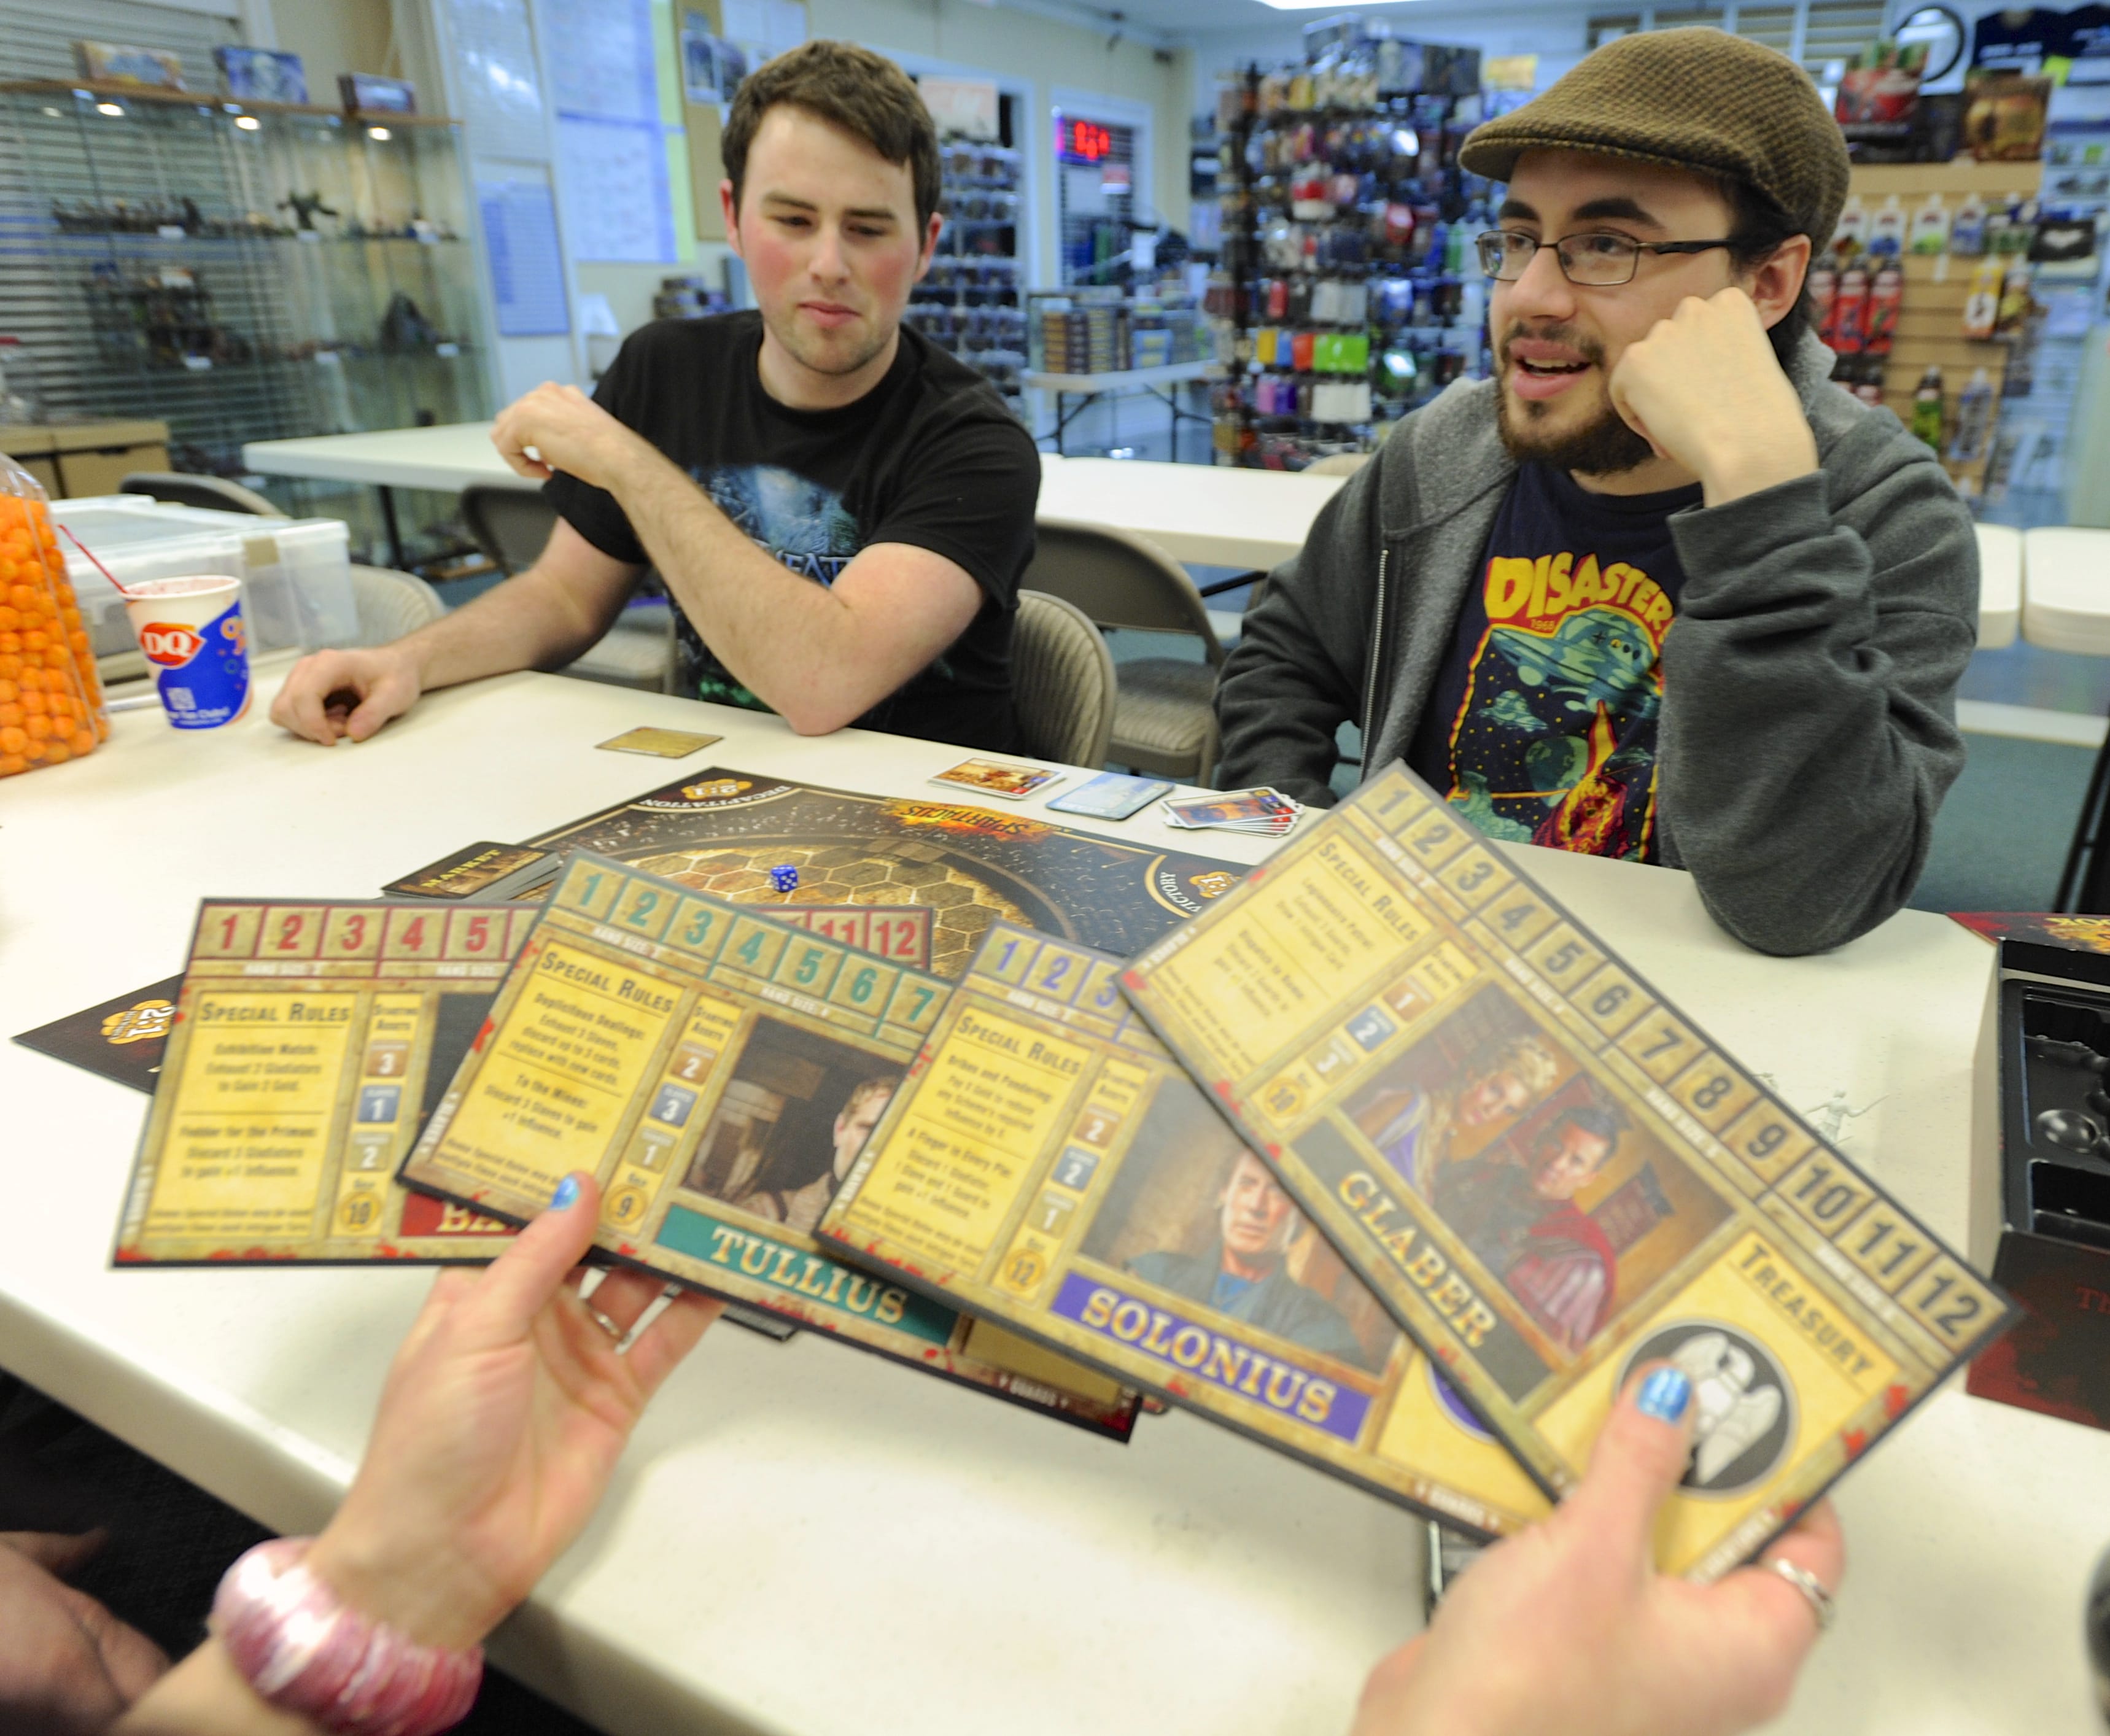 Board gamer Seaton Bryan, right, explains the rules of Spartacus to other players, including Robert Wood on March 15 at the Dice Age store in Vancouver.